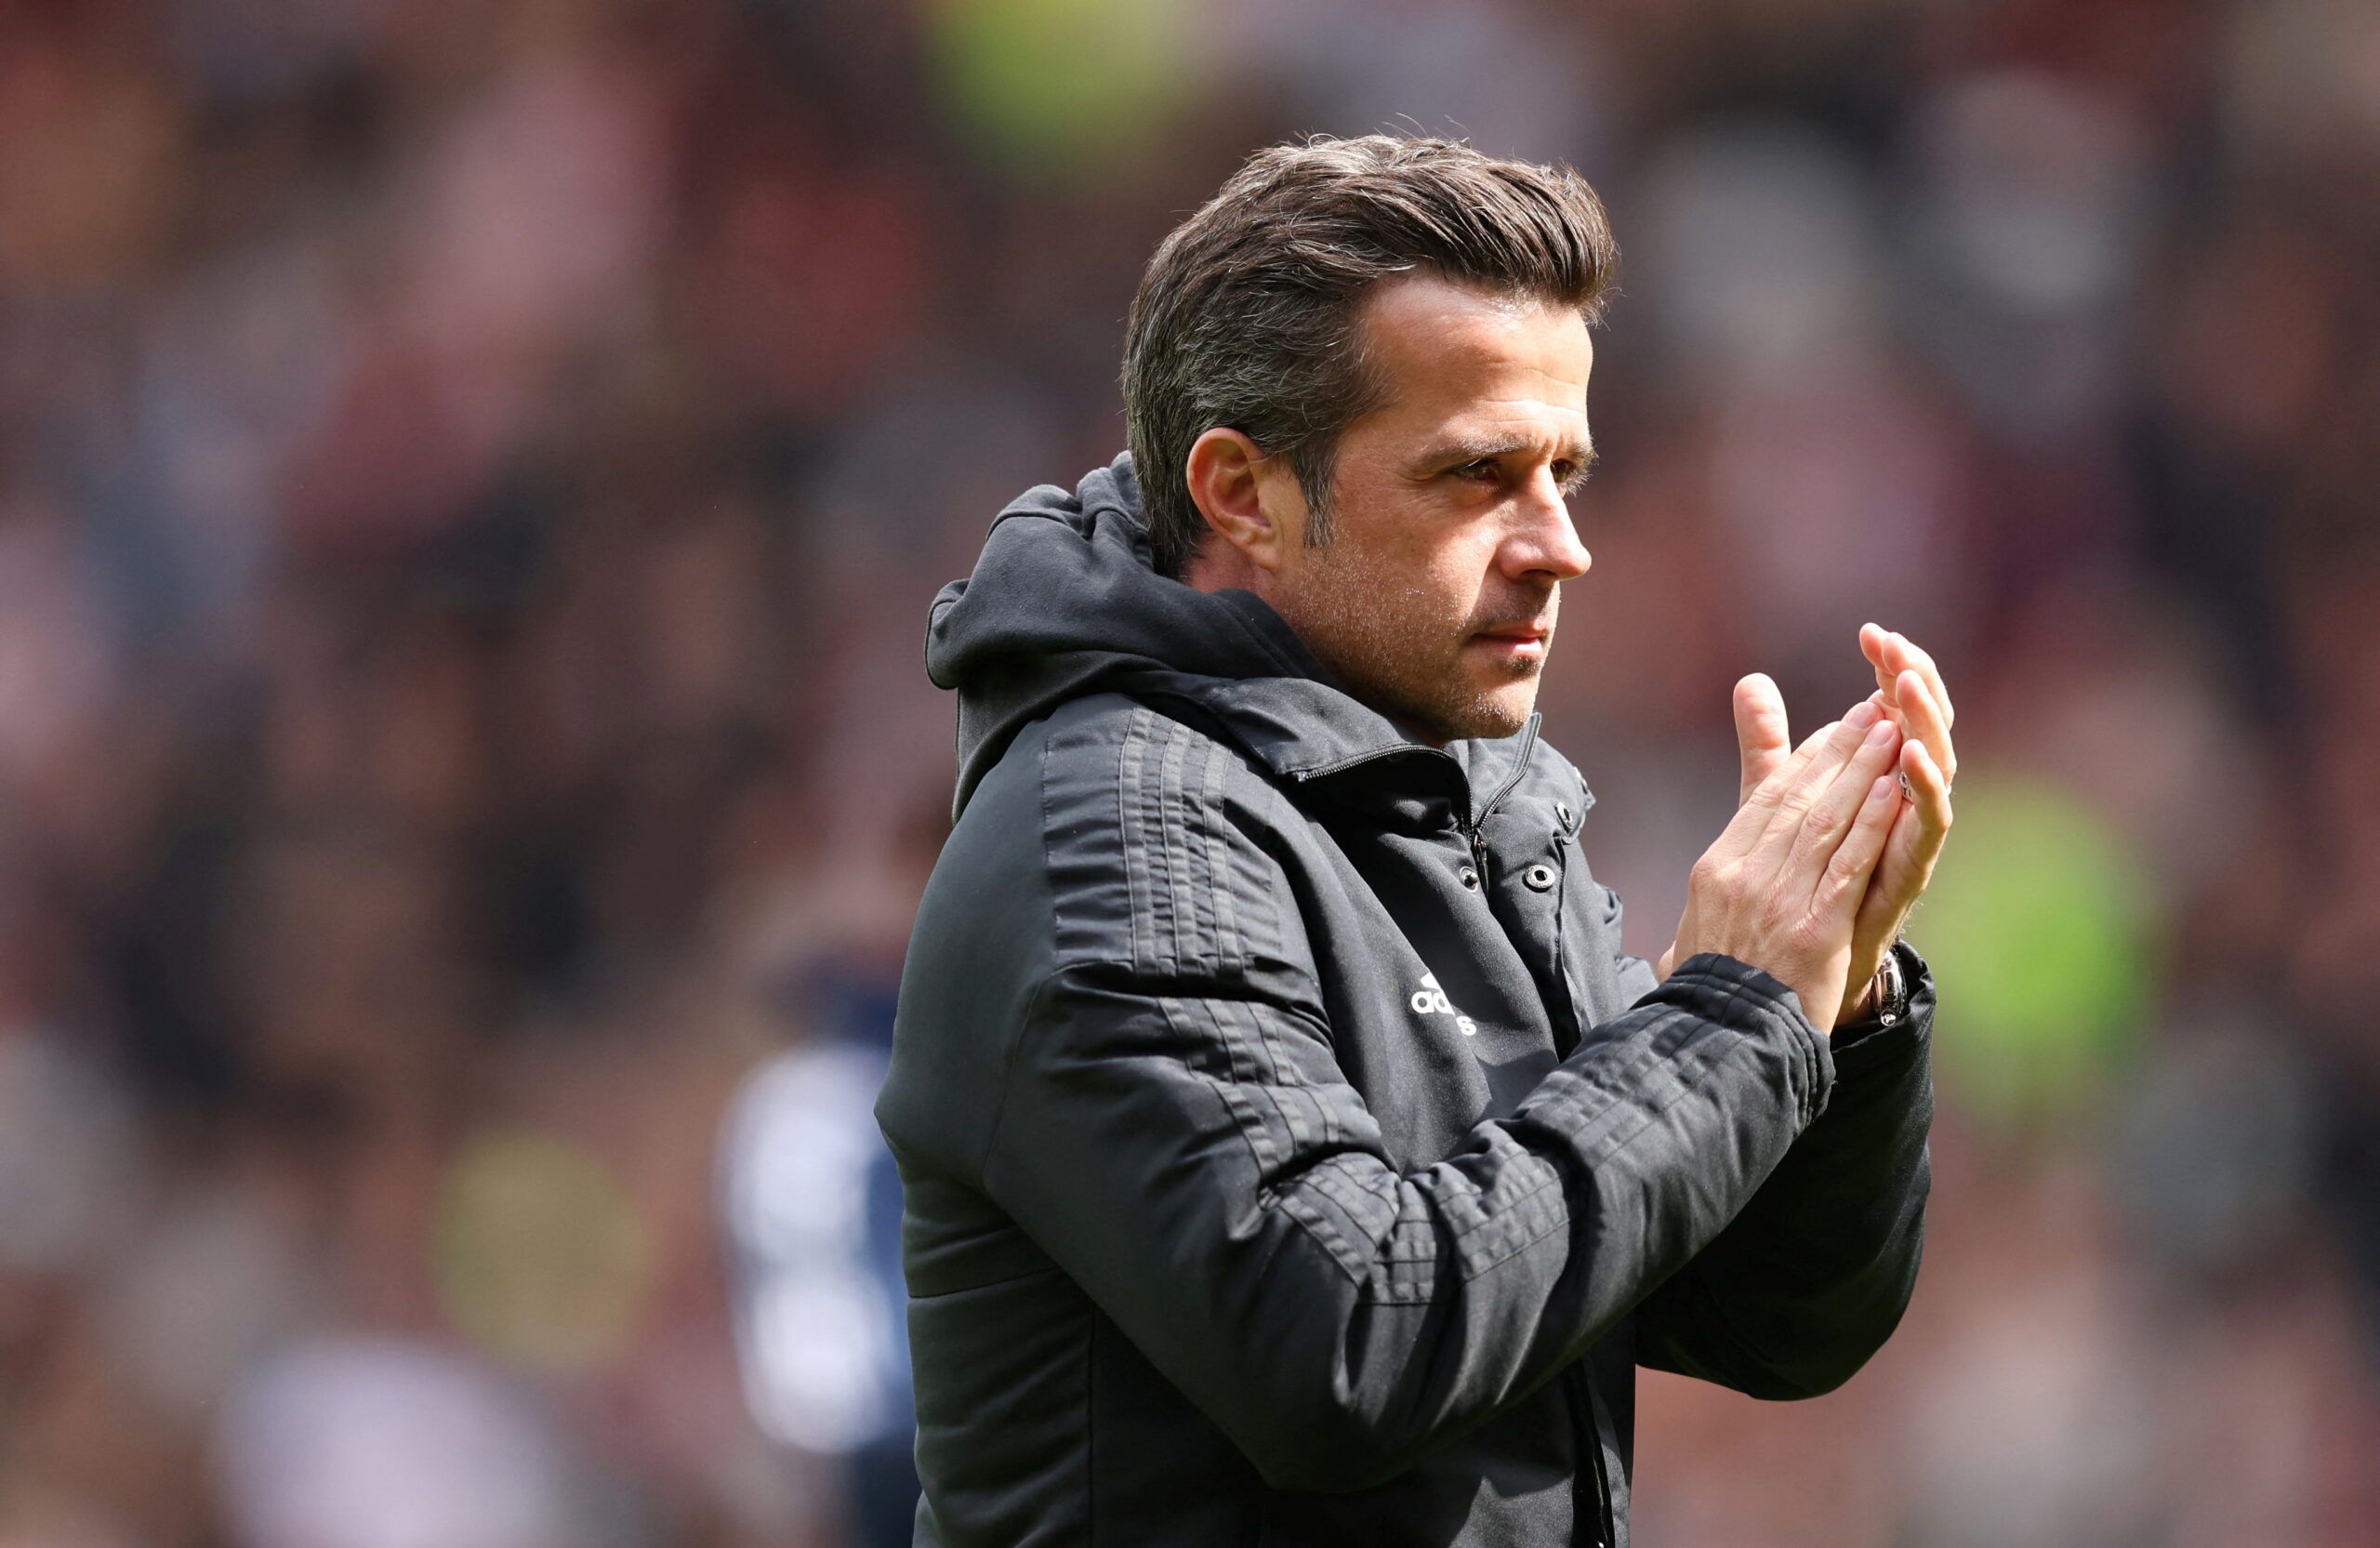 Soccer Football - Championship - Sheffield United v Fulham - Bramall Lane, Sheffield, Britain - May 7, 2022 Fulham's manager Marco Silva applauds fans after the match     Action Images/John Clifton  EDITORIAL USE ONLY. No use with unauthorized audio, video, data, fixture lists, club/league logos or 